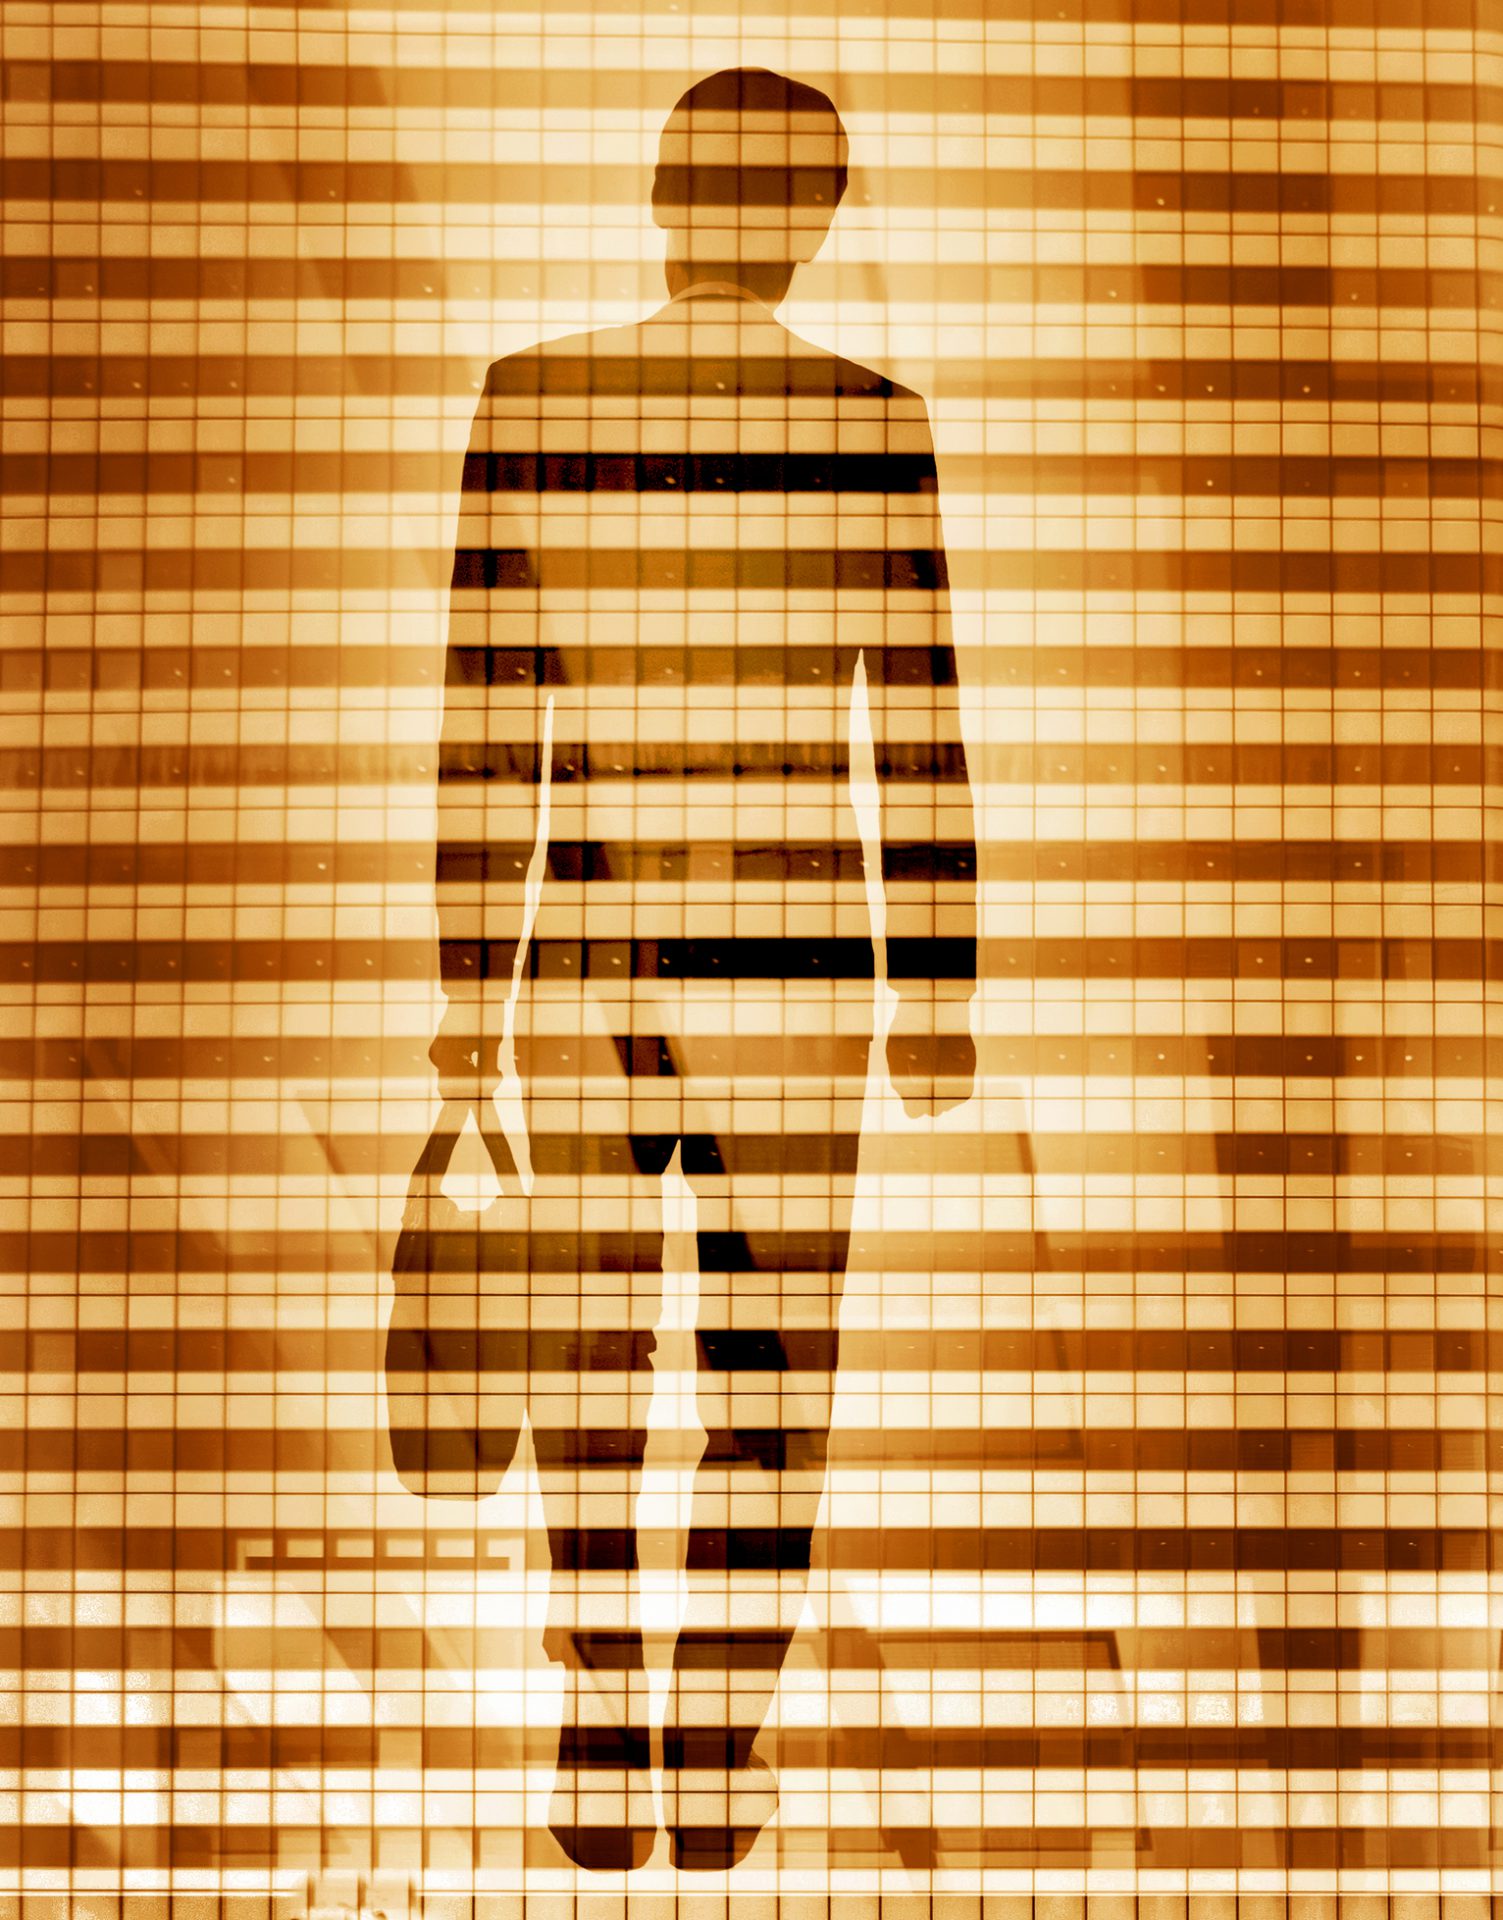 Single silhouette businessman in composite with office tower windows.